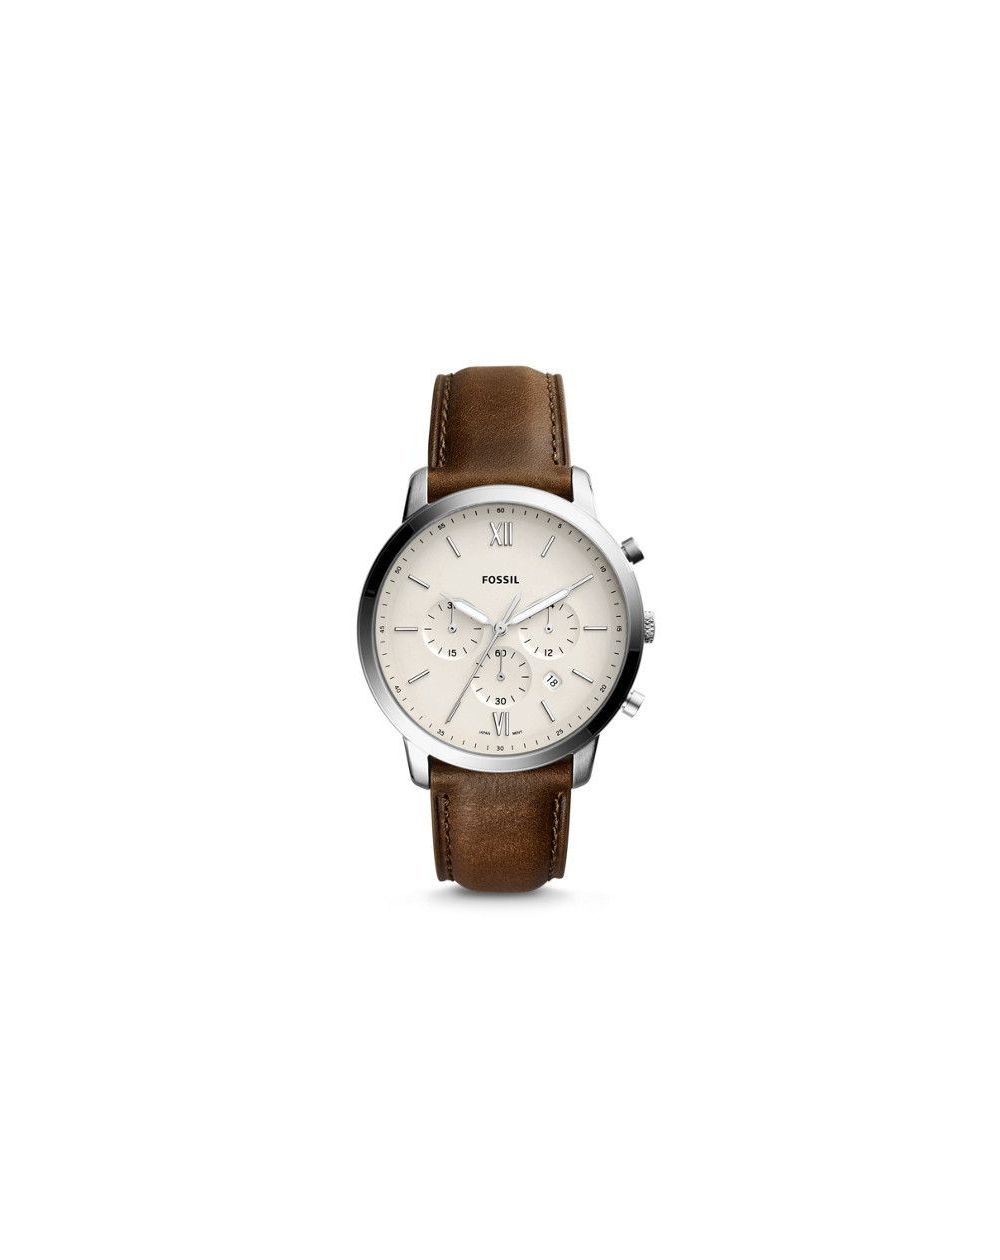 Fossil - Watch Neutra brown leather chronograph